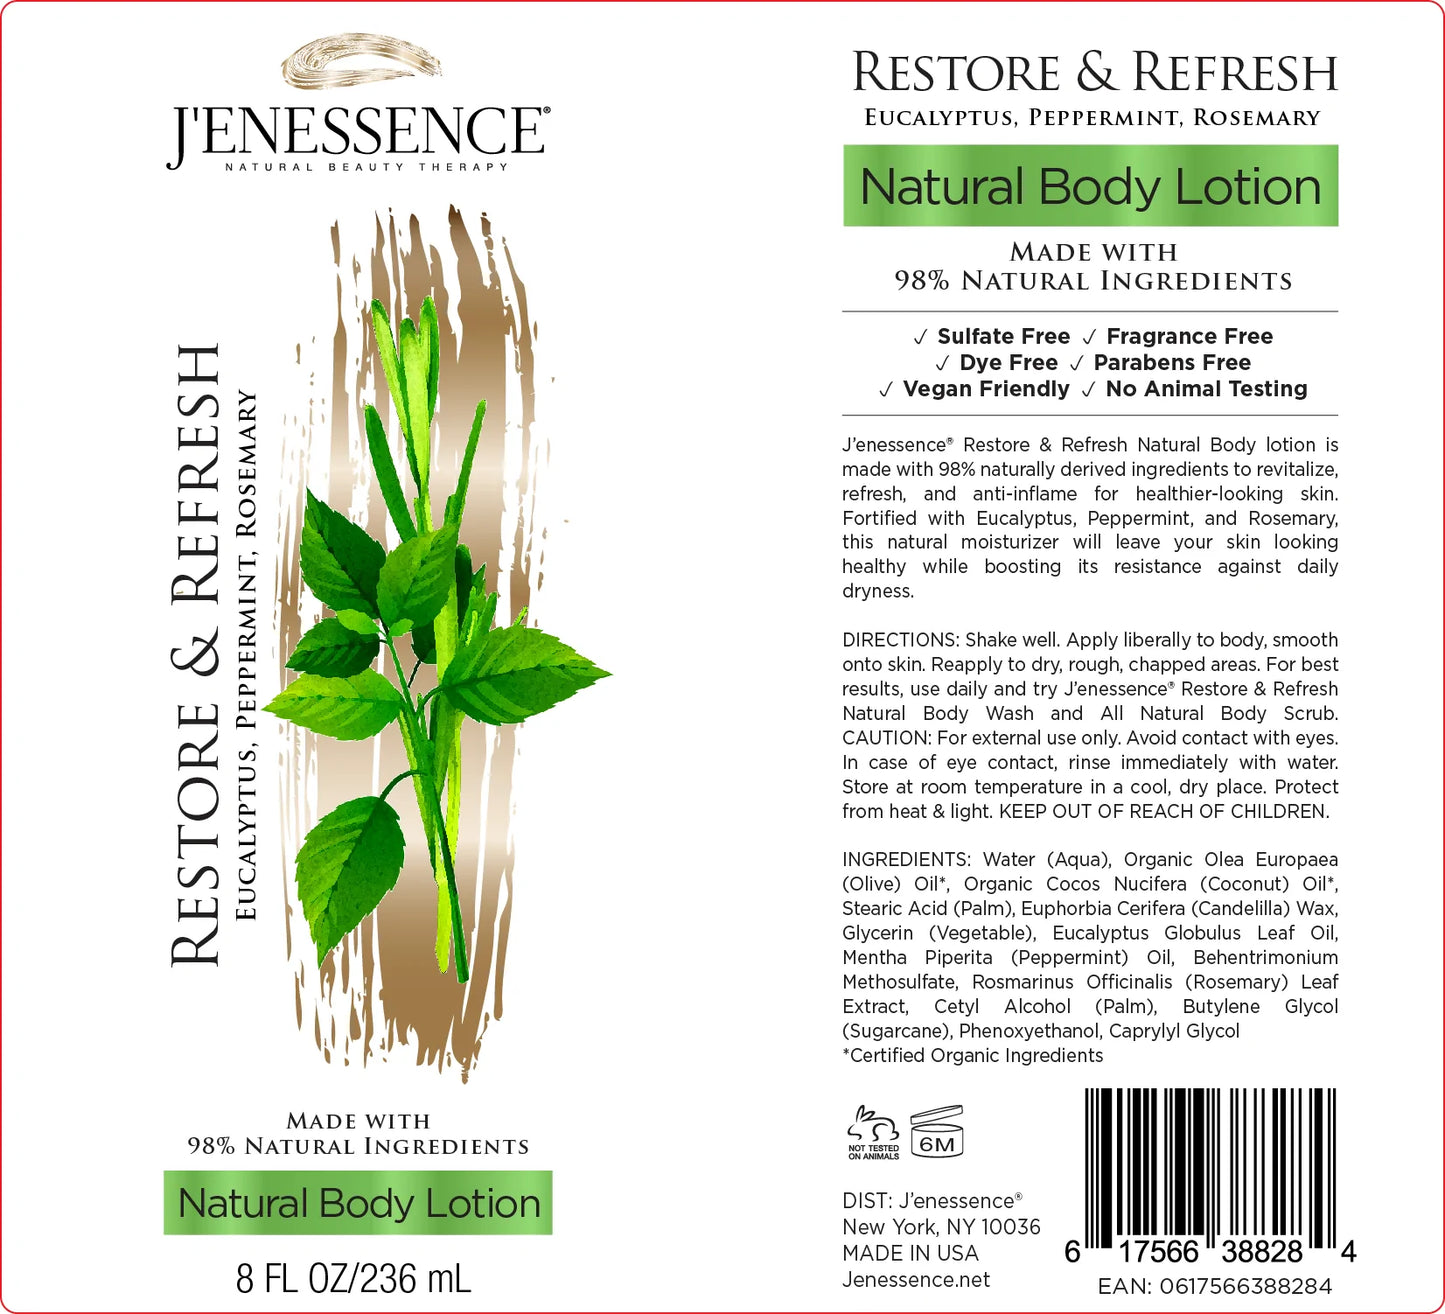 Restore & Refresh 98% Natural Therapeutic Body Lotion (Mint, Eucalyptus, Rosemary)